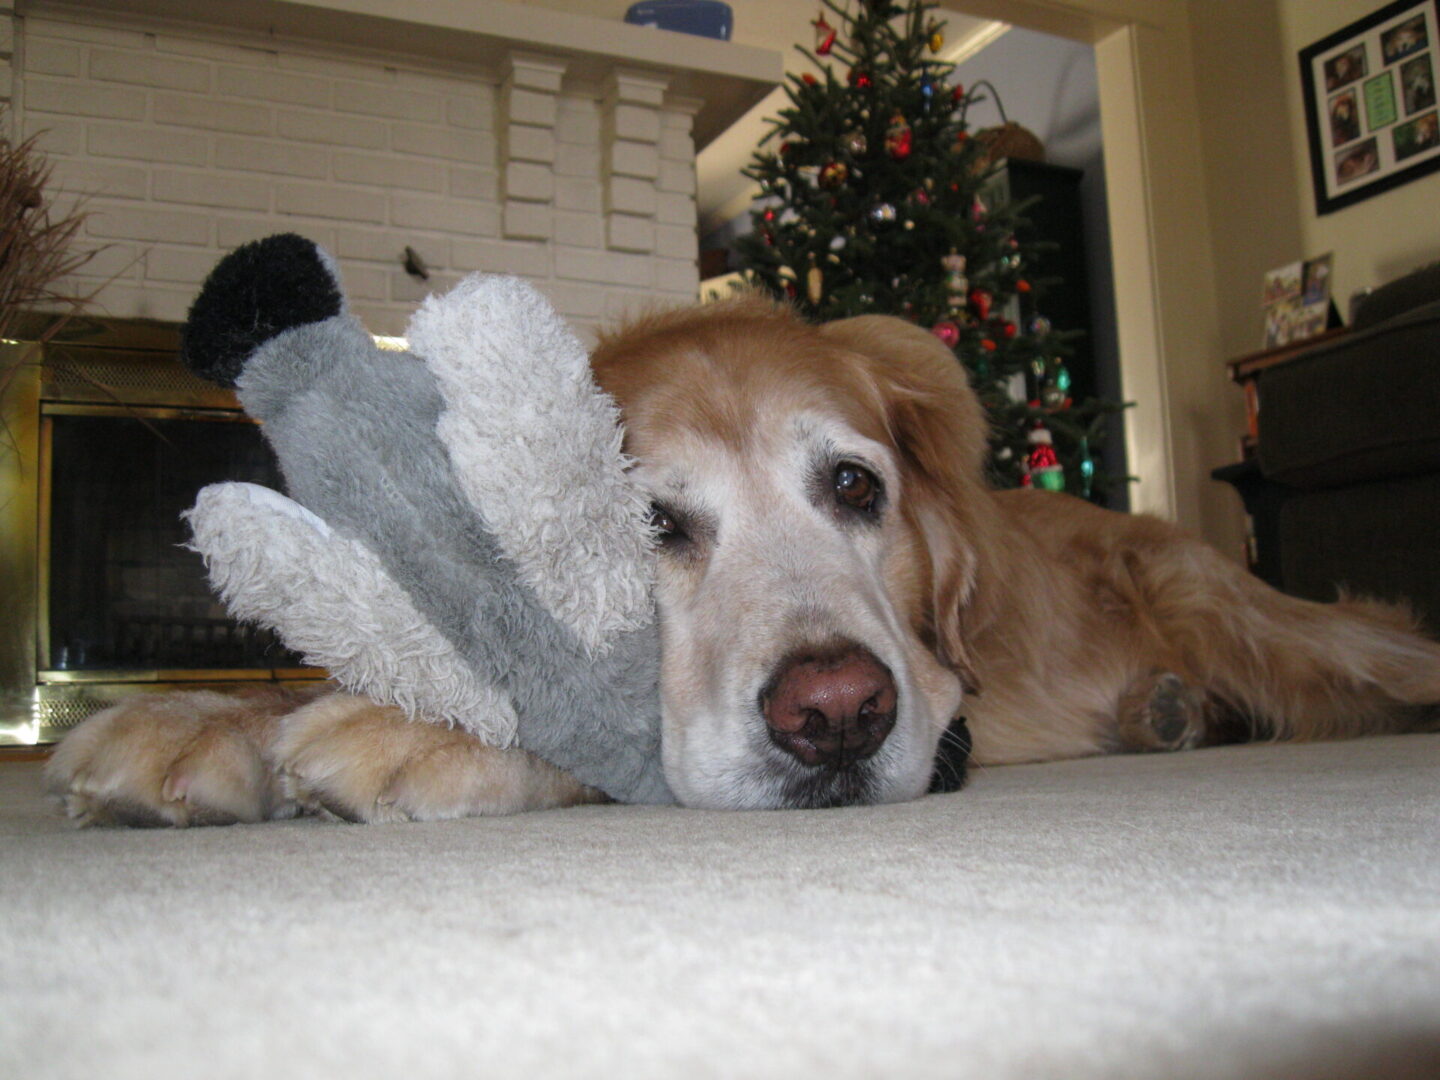 Golden retriever lying on the floor with a toy, indoors by a christmas tree.